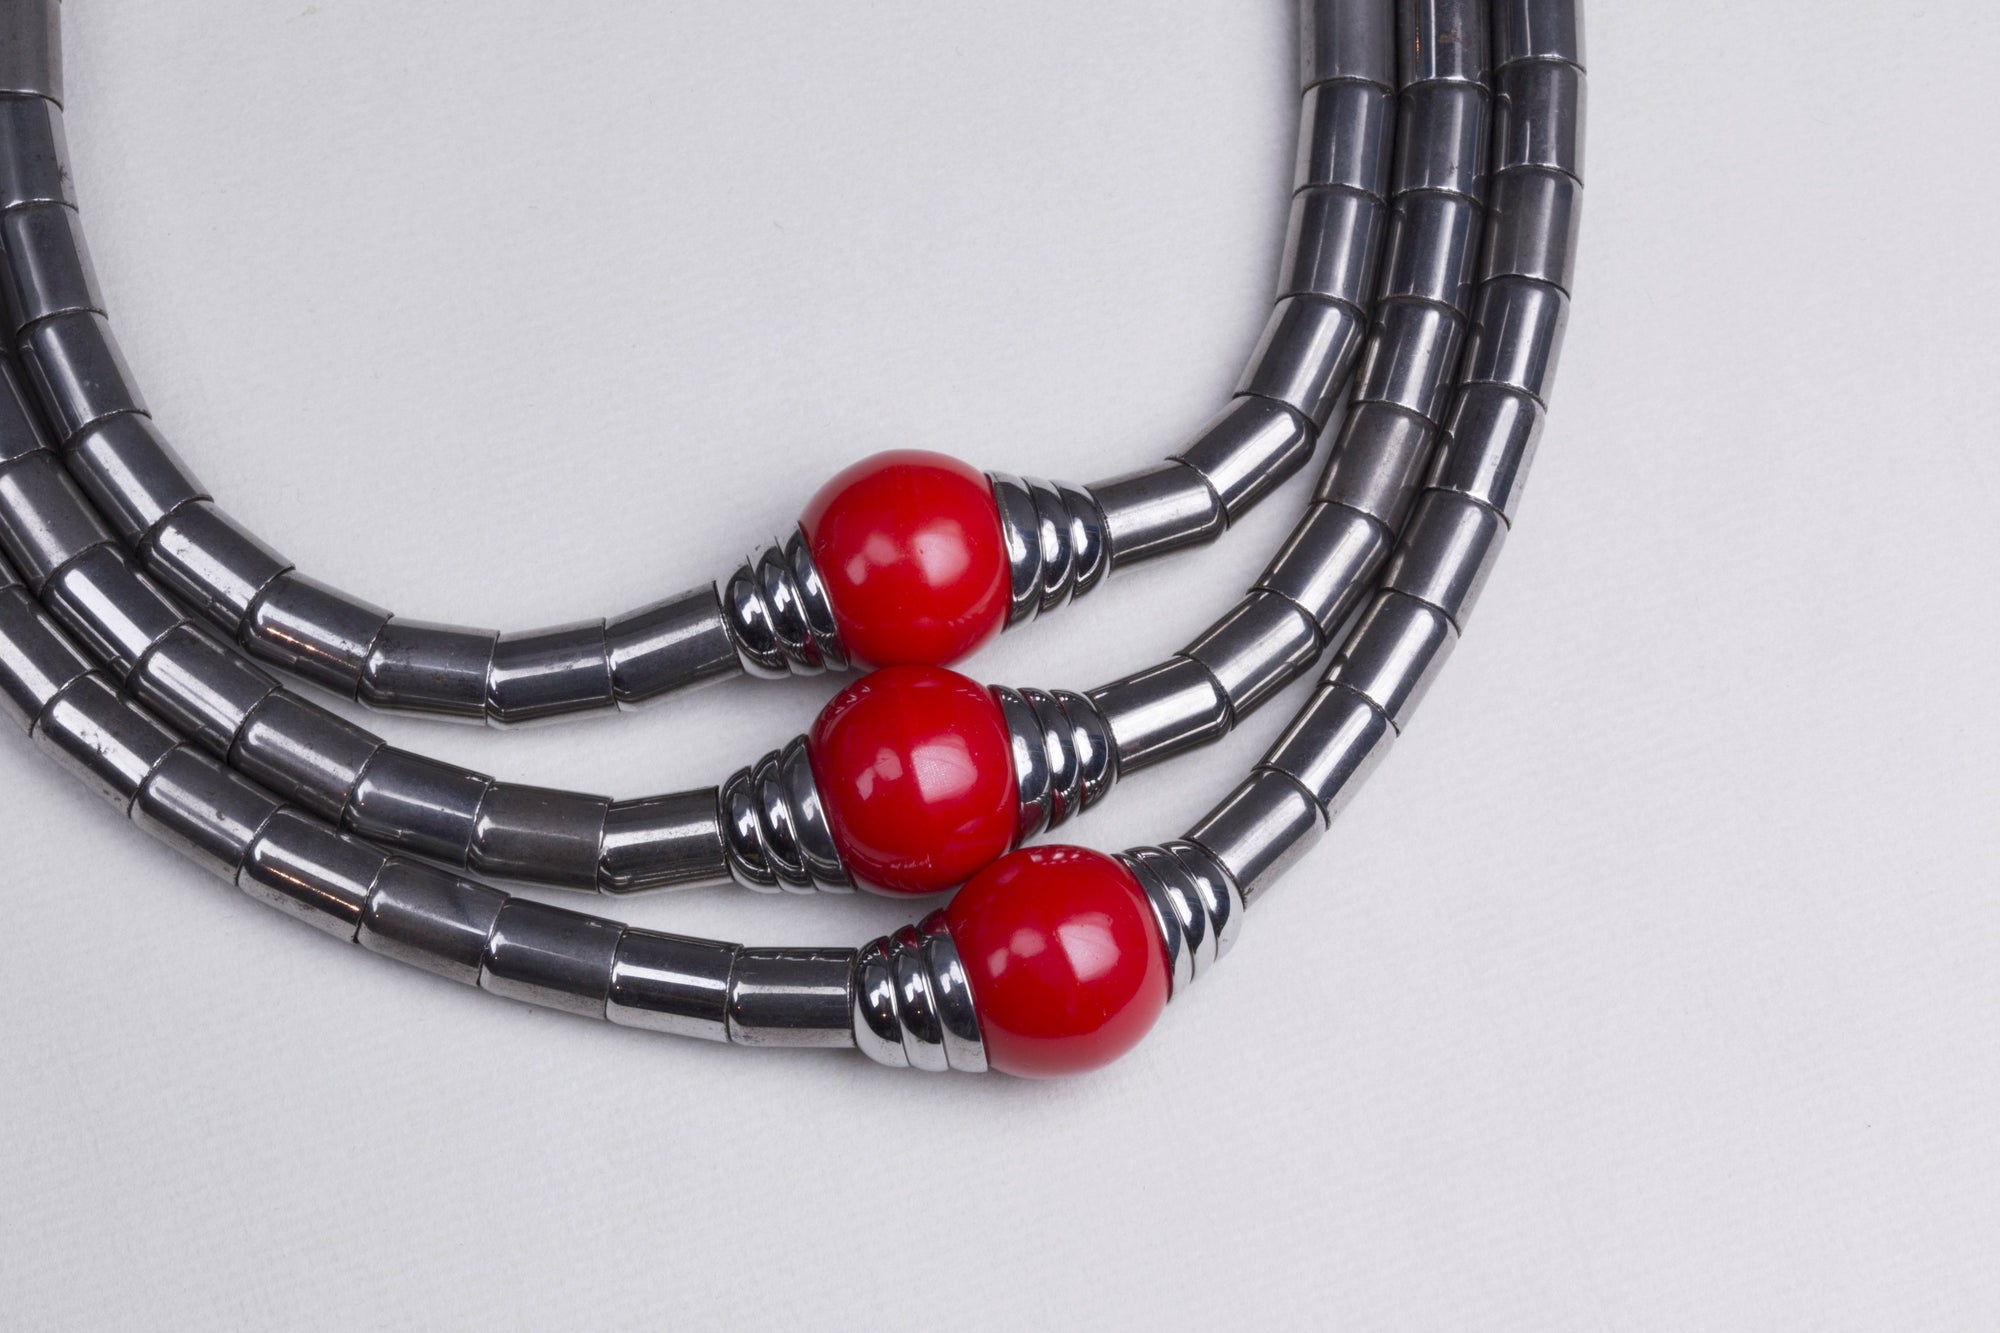 Vintage Chrome and Red Beads Art Deco Necklace